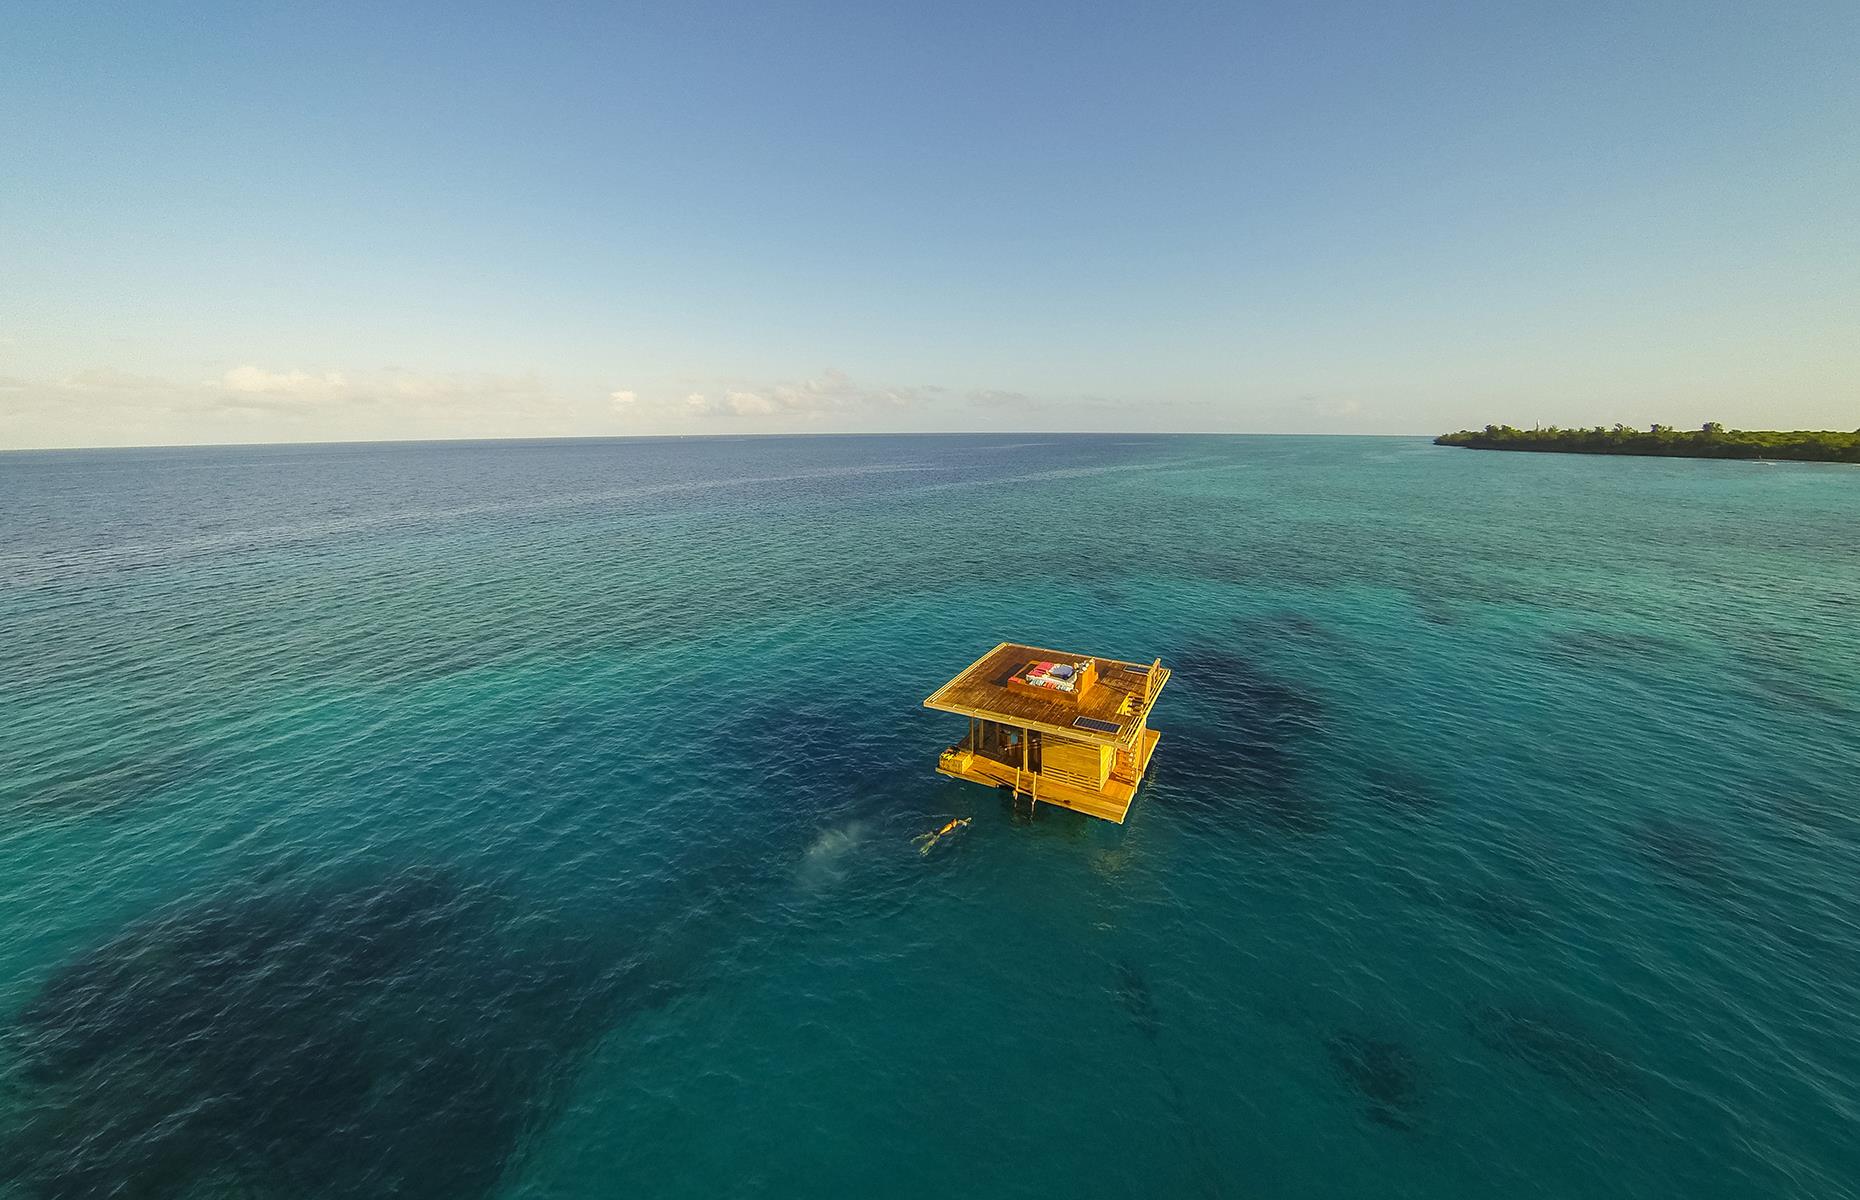 <p>Taking floating hotels to the extreme is <a href="https://themantaresort.com">Manta Resort</a> off the coast of Pemba Island in Tanzania. Because over-water villas simply aren't enough for them, they've got an incredible 'in-ocean' villa, which is quite literally stranded out to sea. The villa has three floors, one of which is underwater. </p>